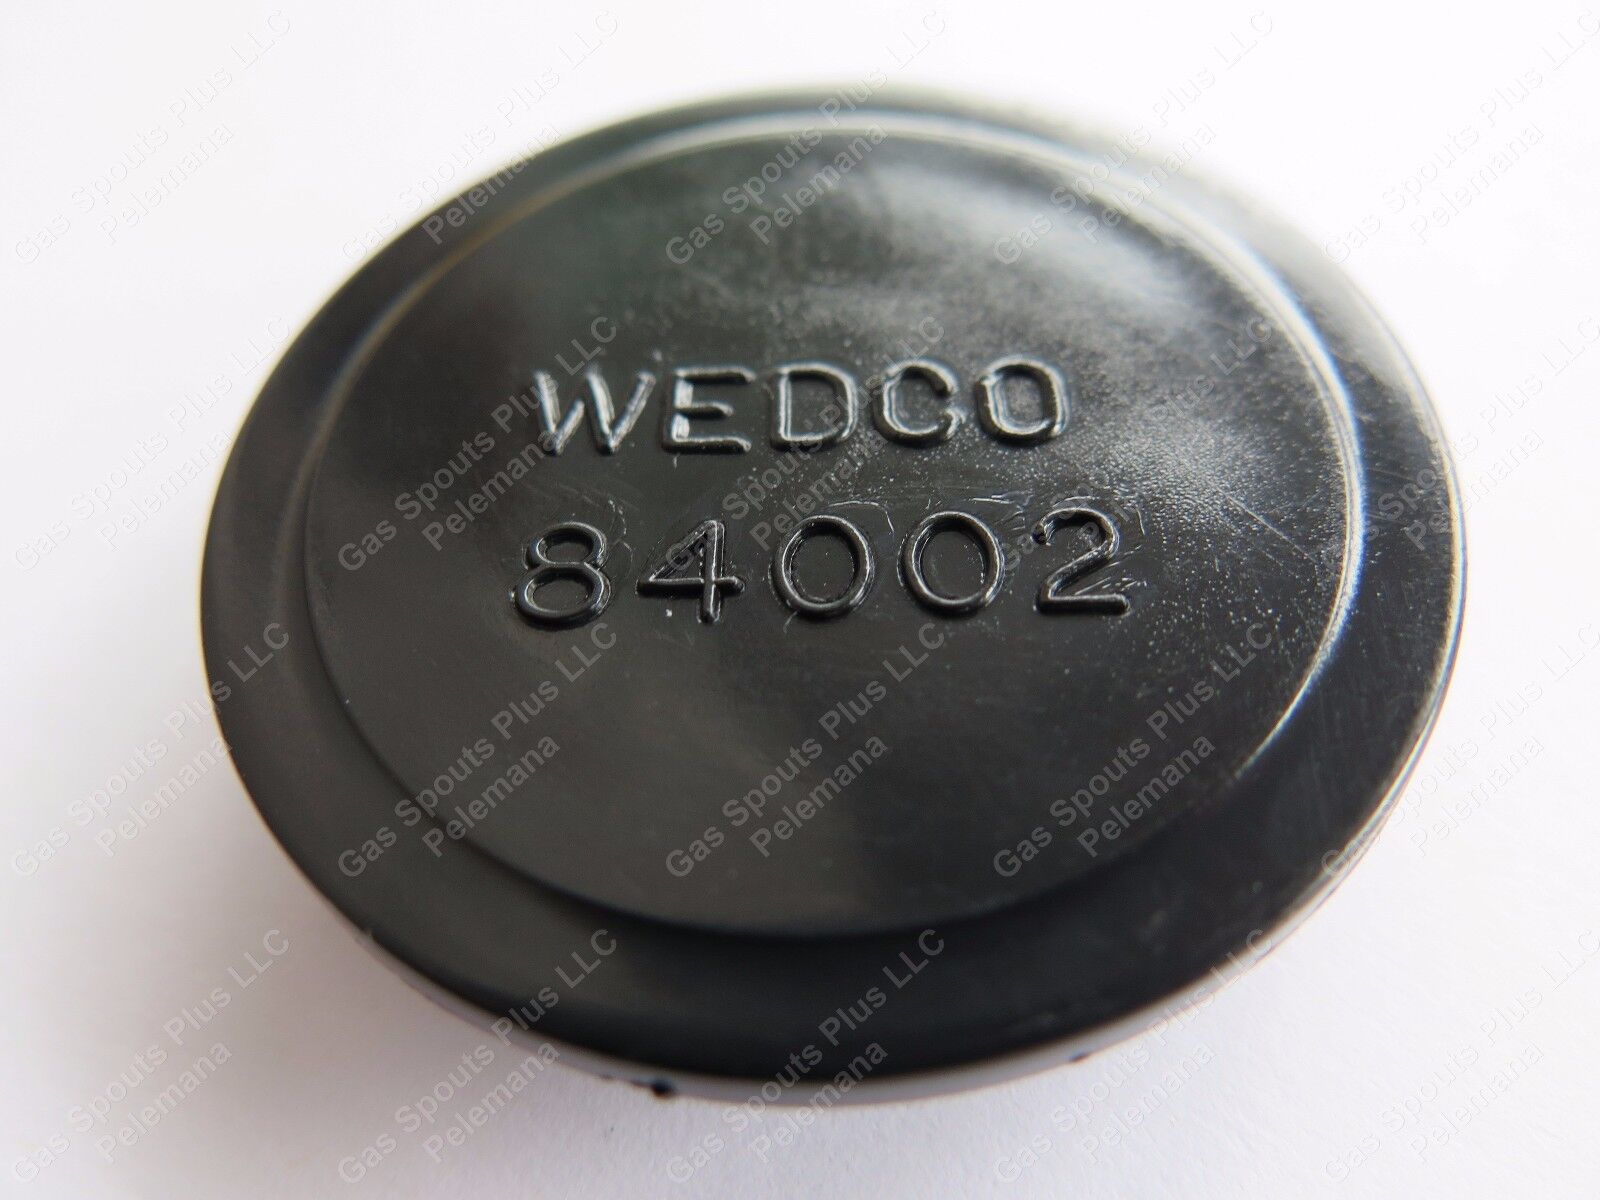 2-Pack Wedco Black Stopper Seal Discs 84002 Replacement Gas Can Parts Briggs NEW Wedco, Briggs & Stratton 80436 - фотография #3